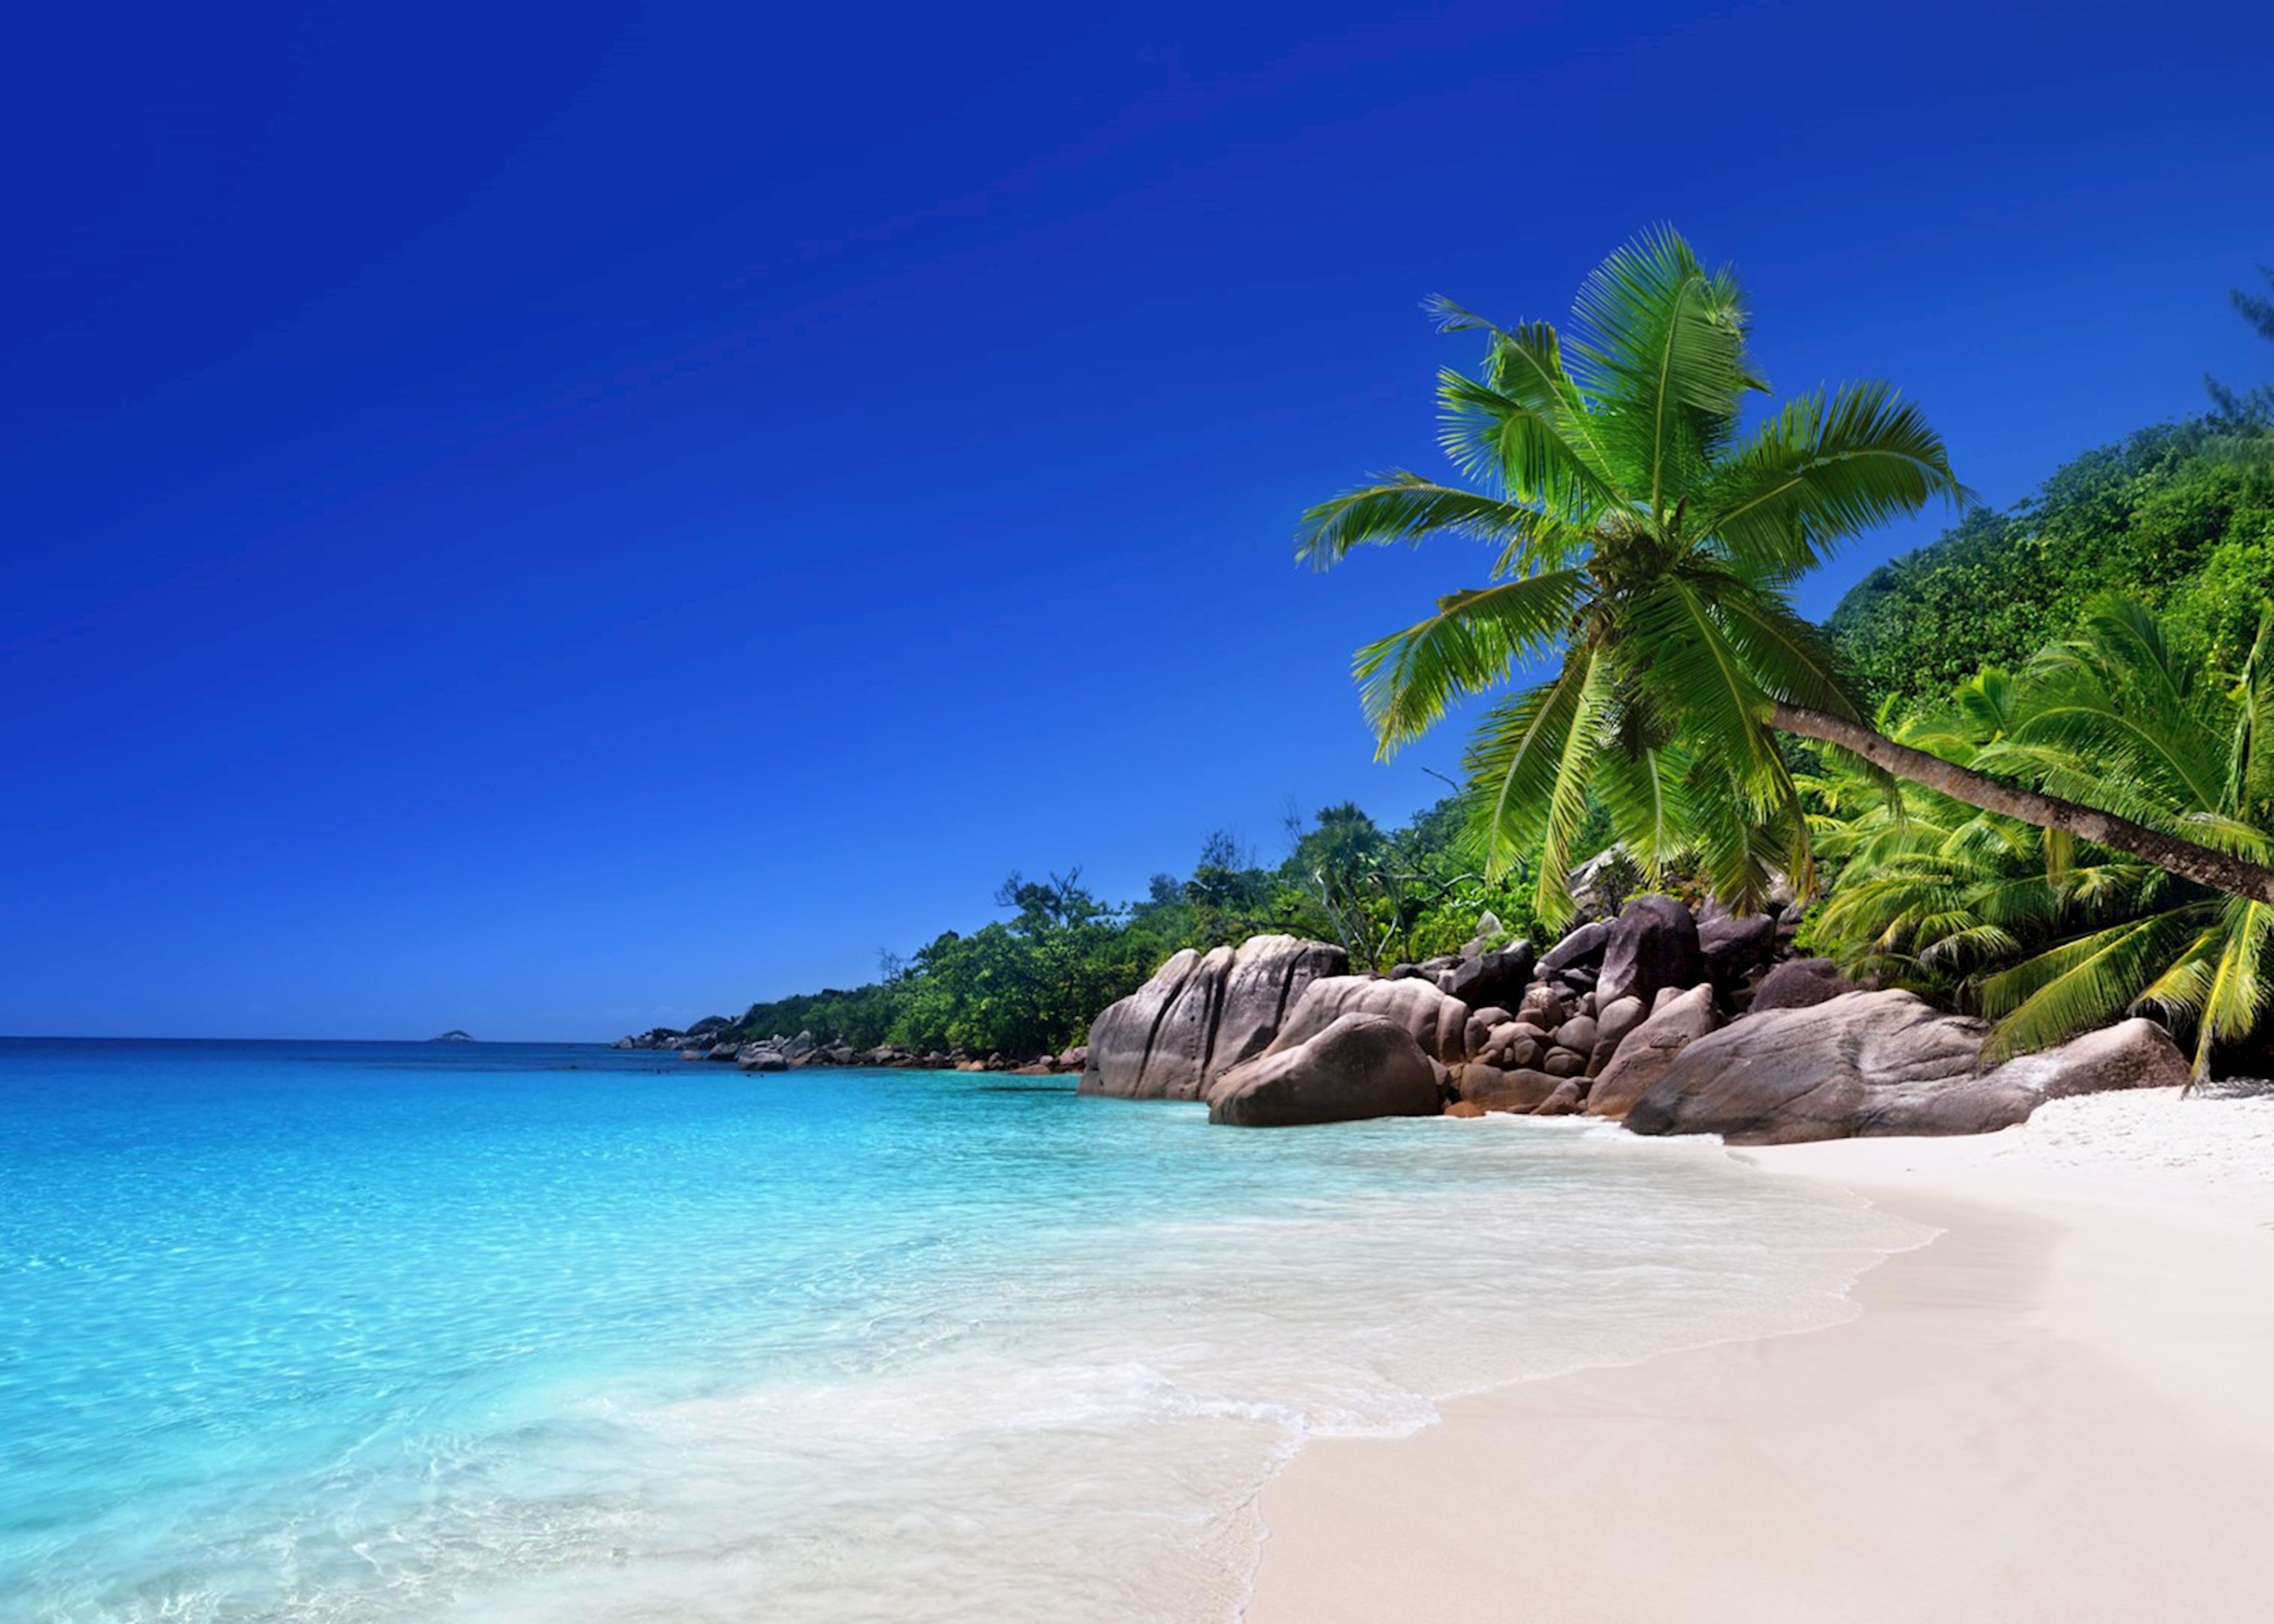 Hotels & Resorts in the Seychelles | Audley Travel UK